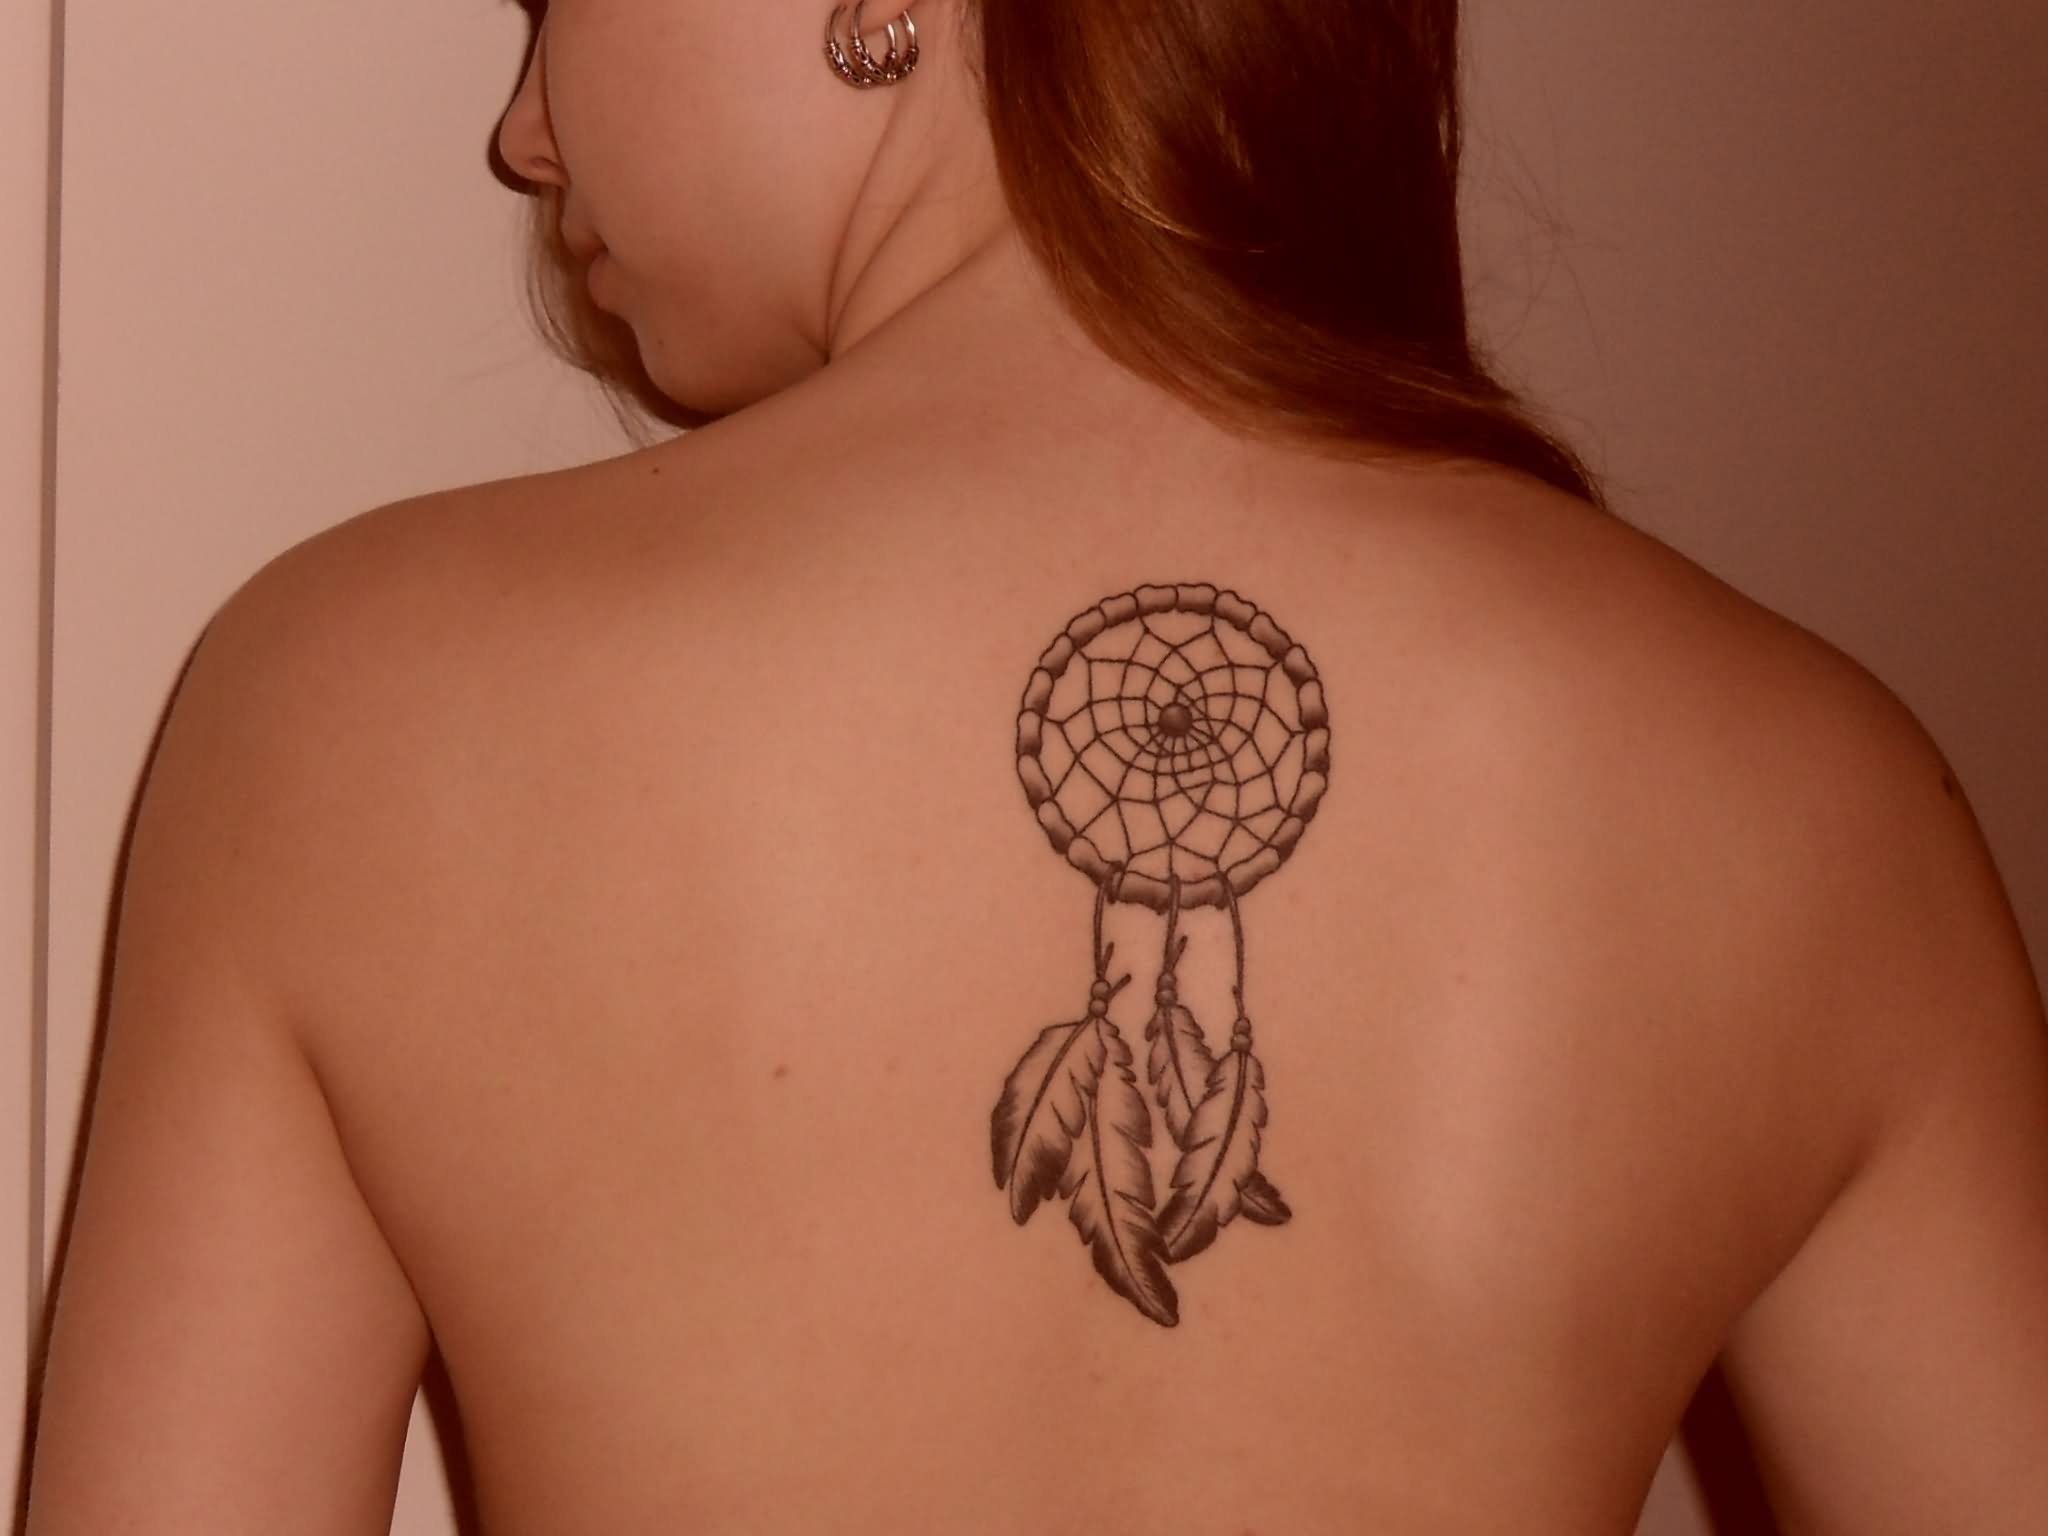 Black And Grey Dreamcatcher Tattoo On Back.